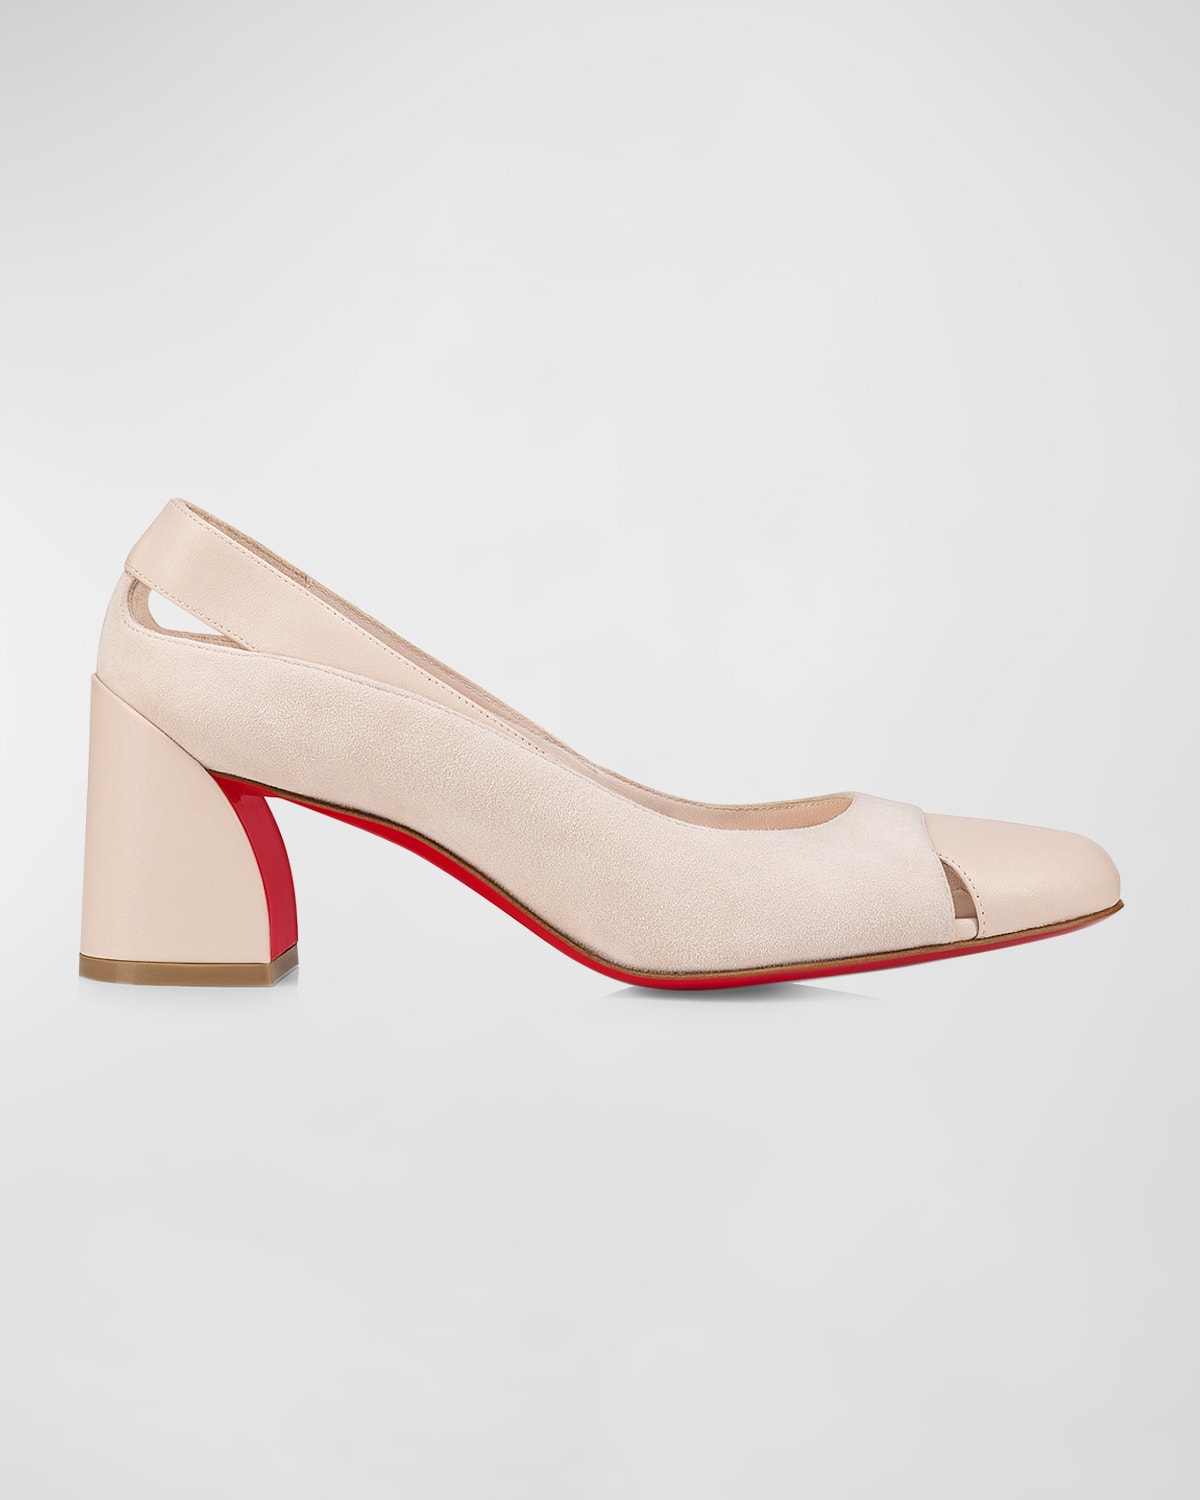 CHRISTIAN LOUBOUTIN MISS DUVETTE MIXED LEATHER RED SOLE PUMPS